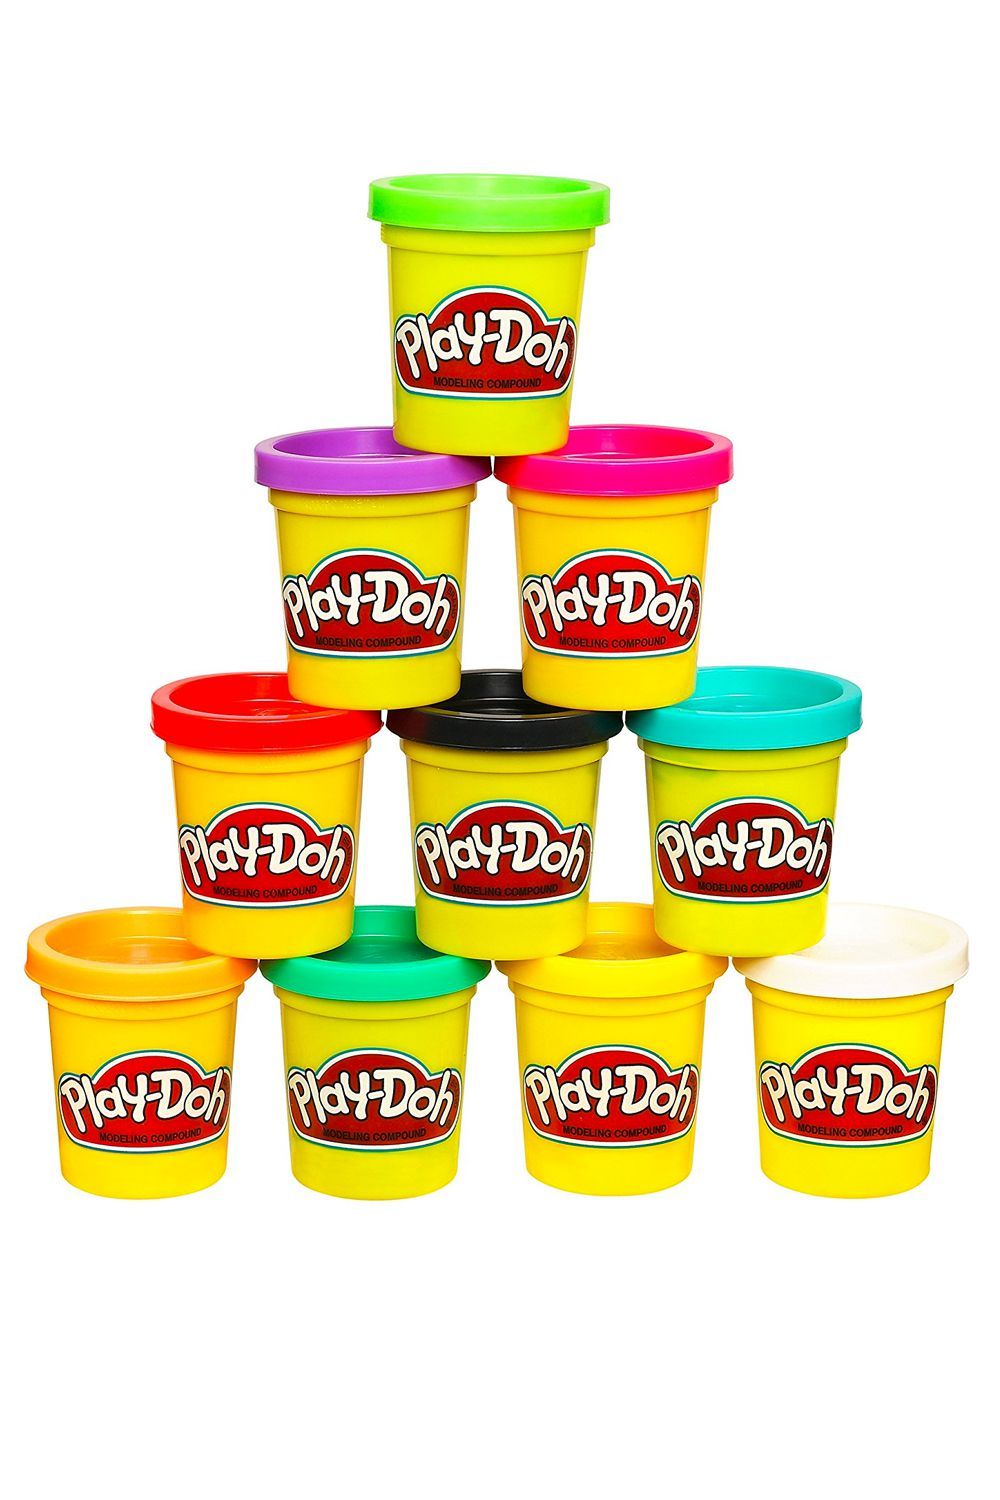 play doh for 3 year olds